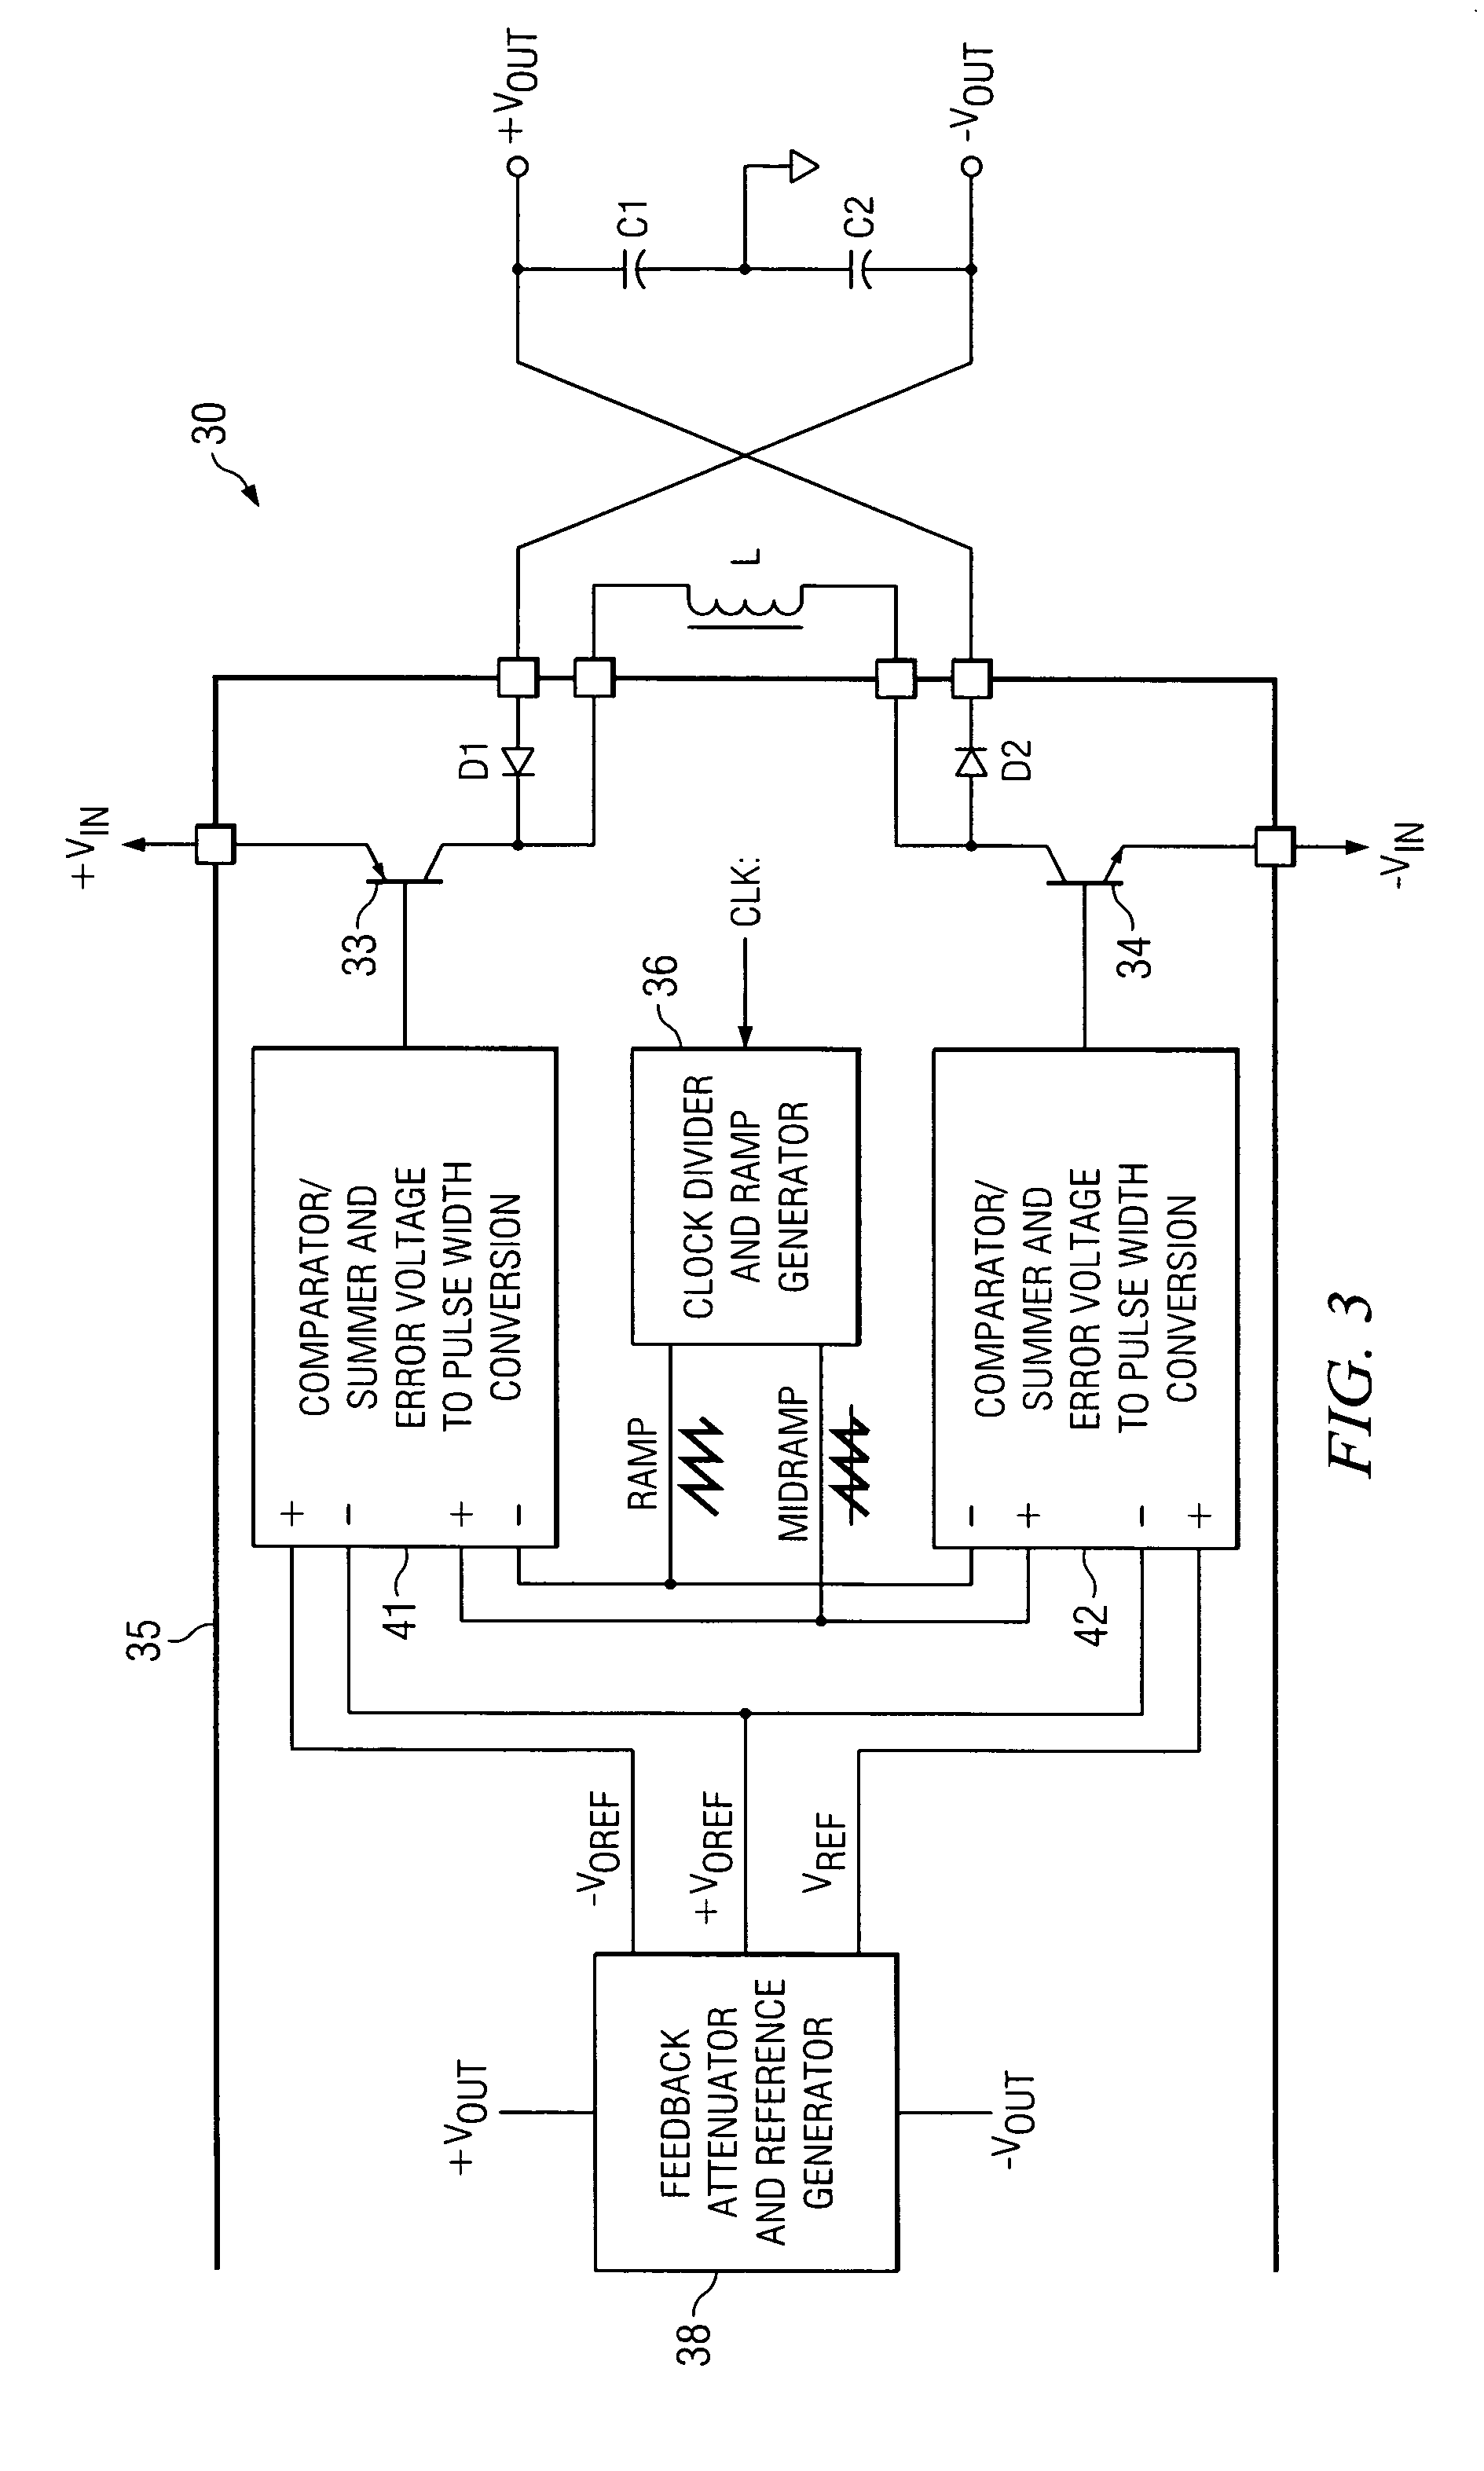 Dual buck-boost converter with single inductor